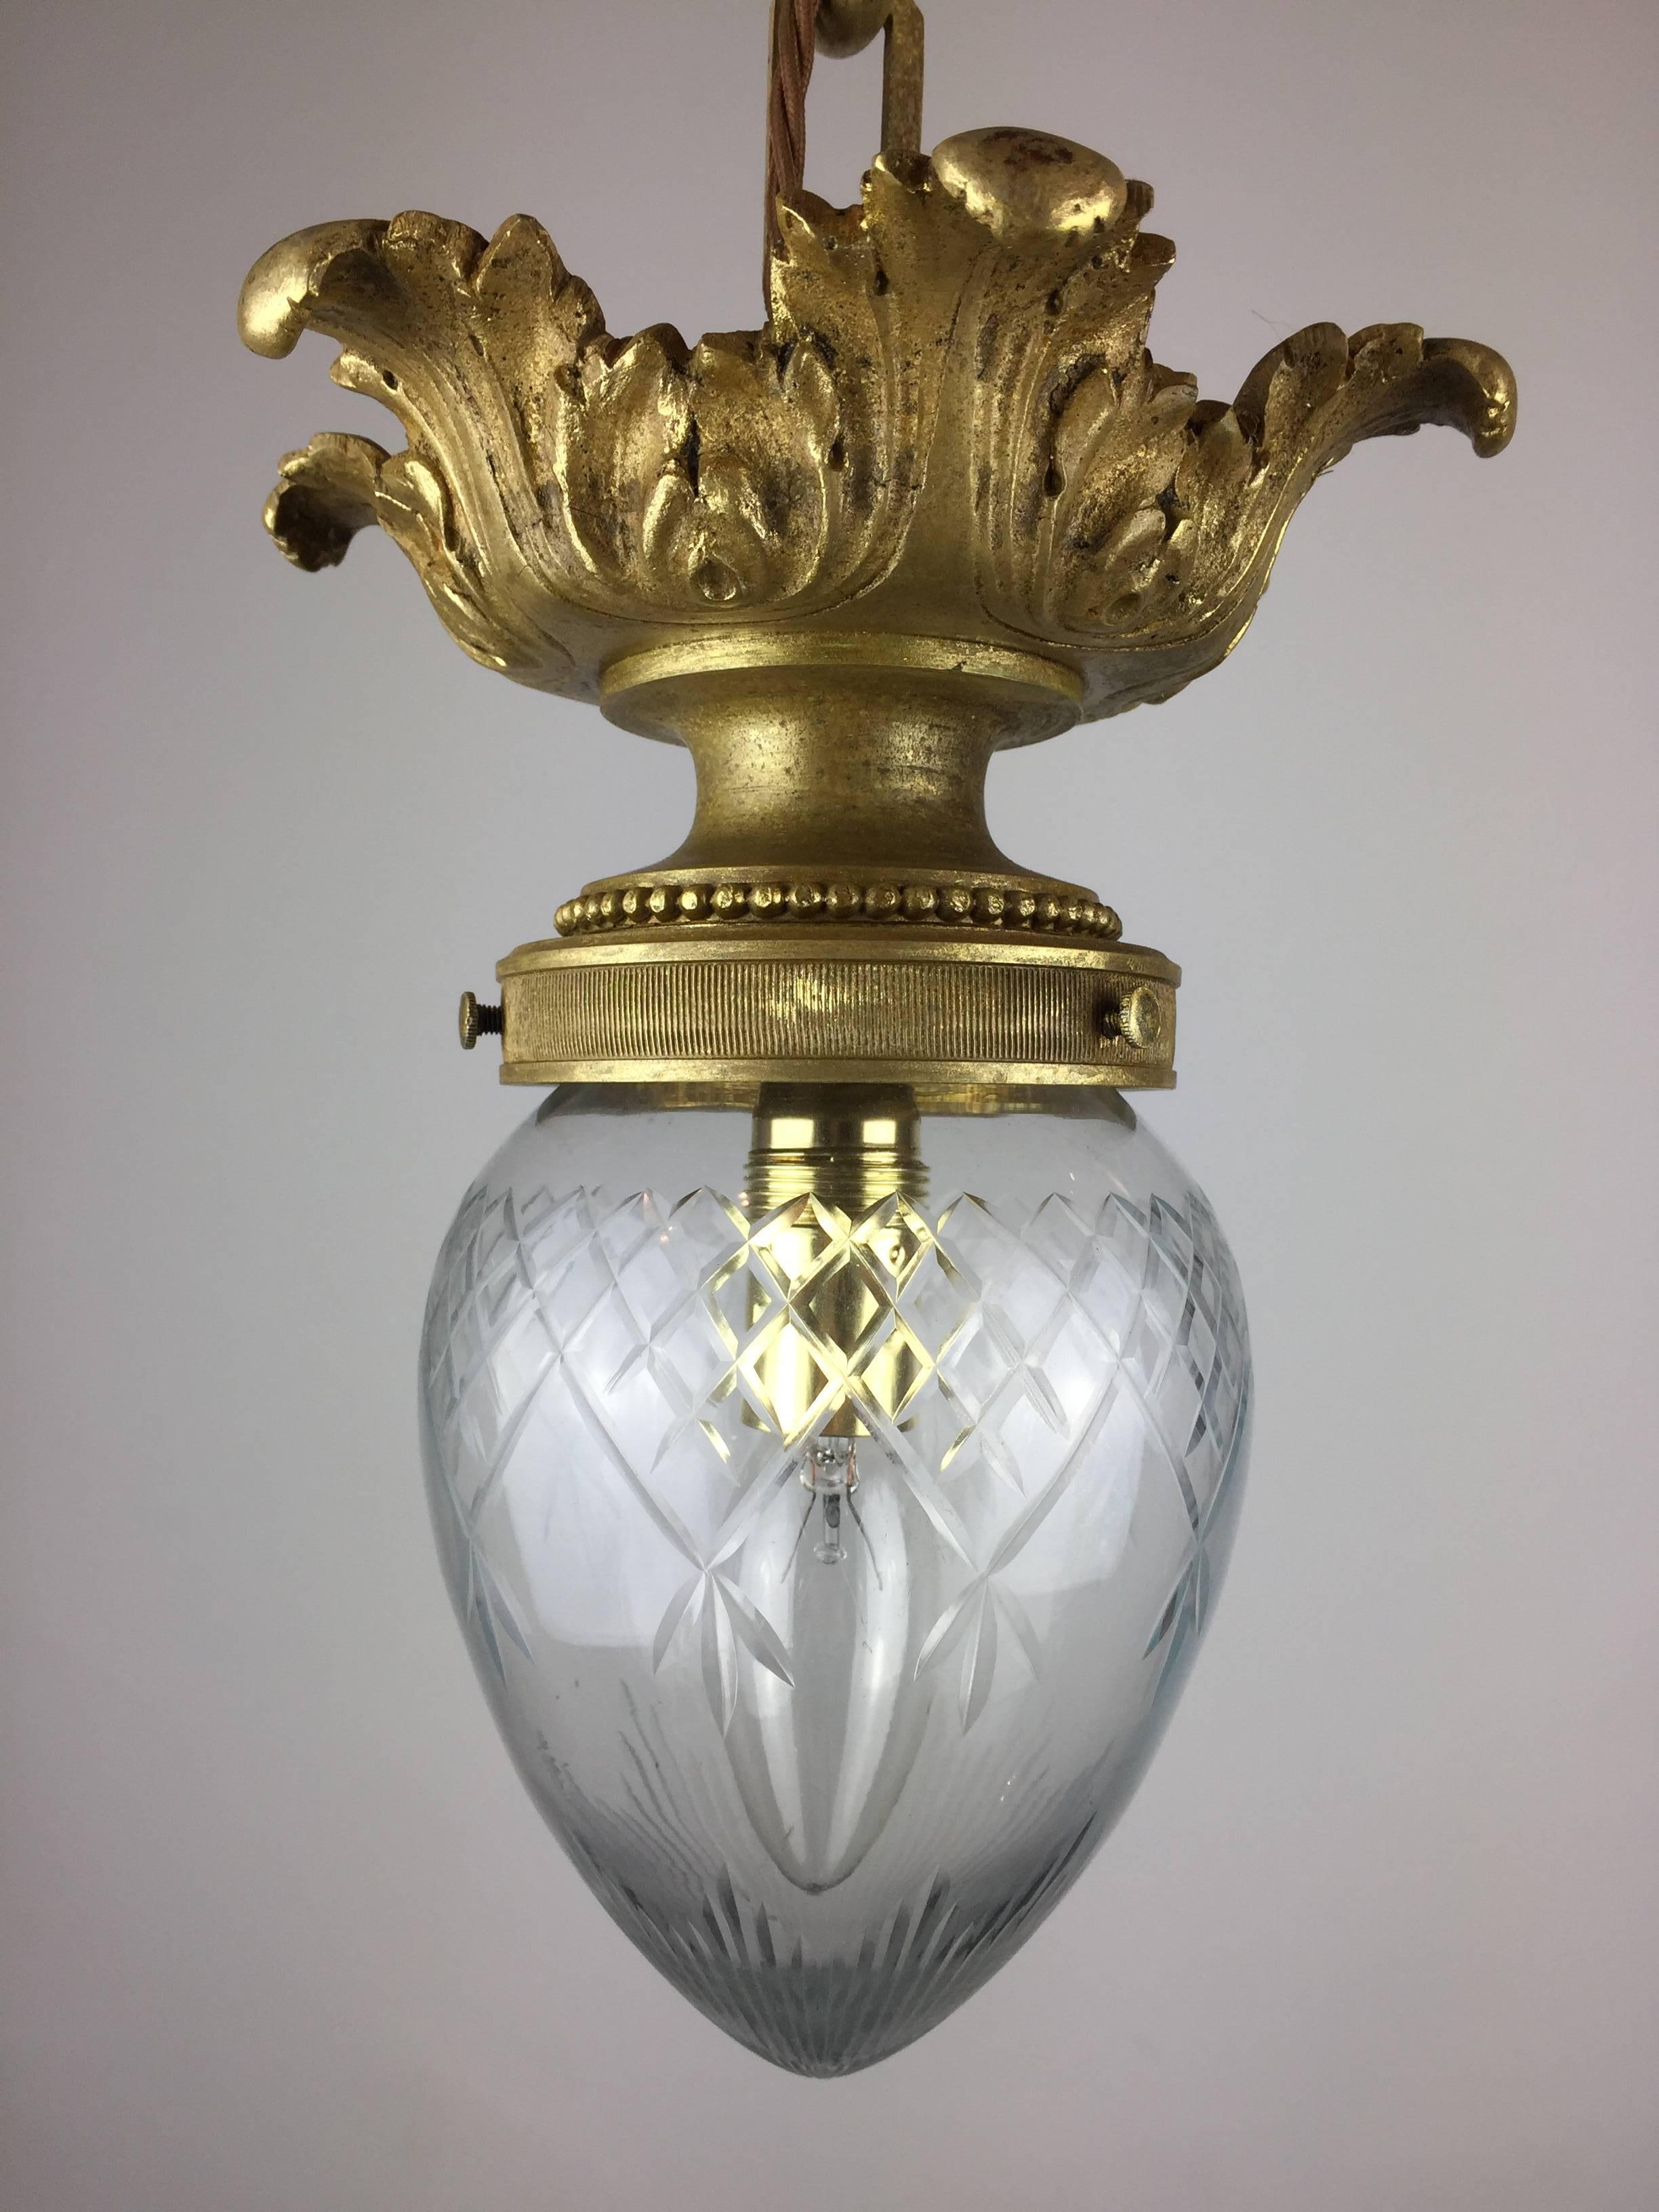 A nice quality, cut glass acorn lantern, in the Rococo style, with original ceiling rose and chain, early 20th century.